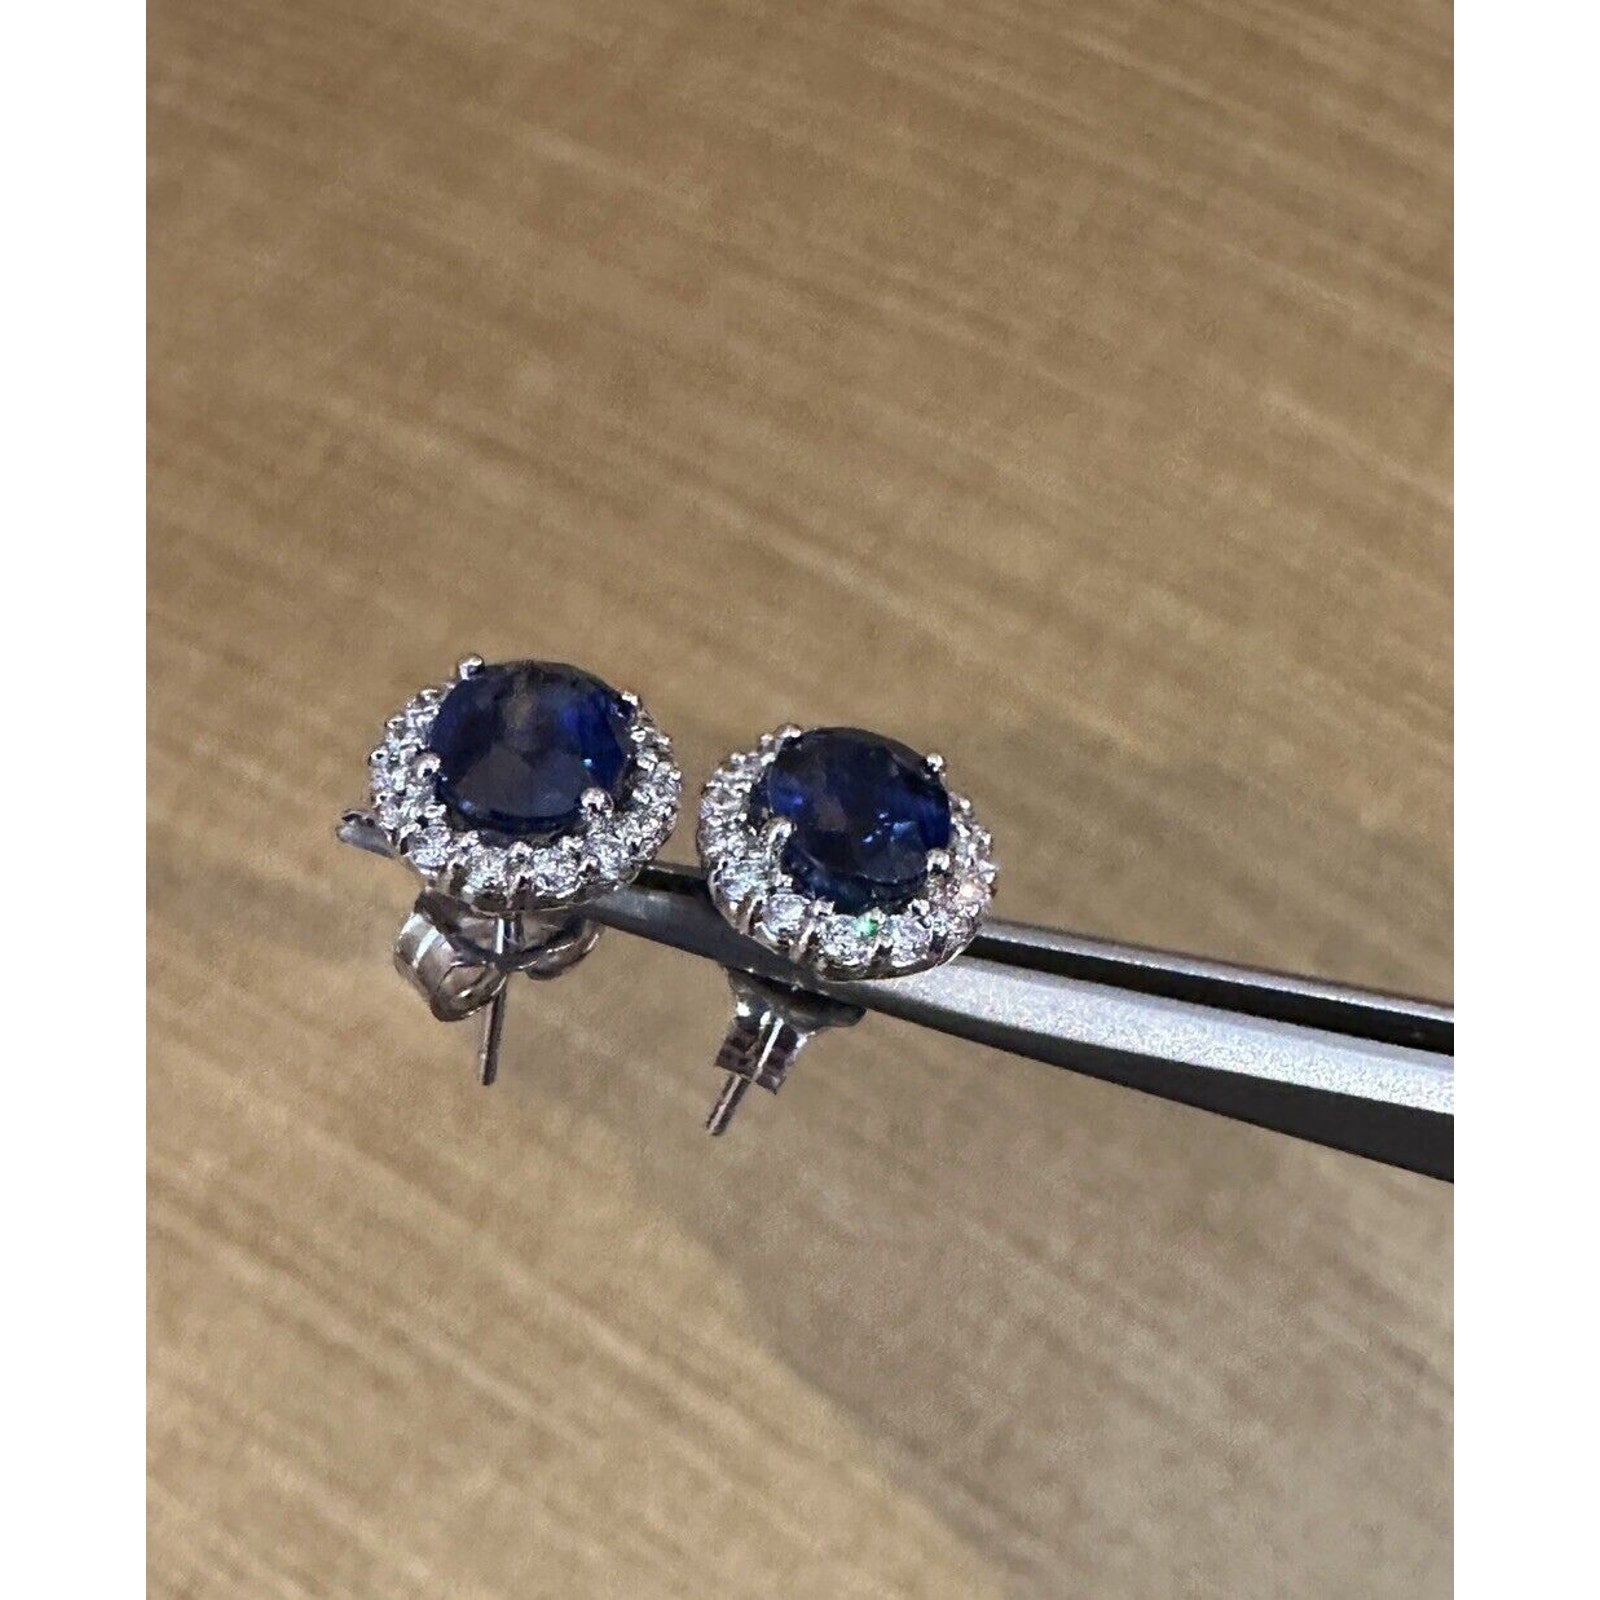 Oval Blue Sapphire and Diamond Halo Earrings in 14k White Gold